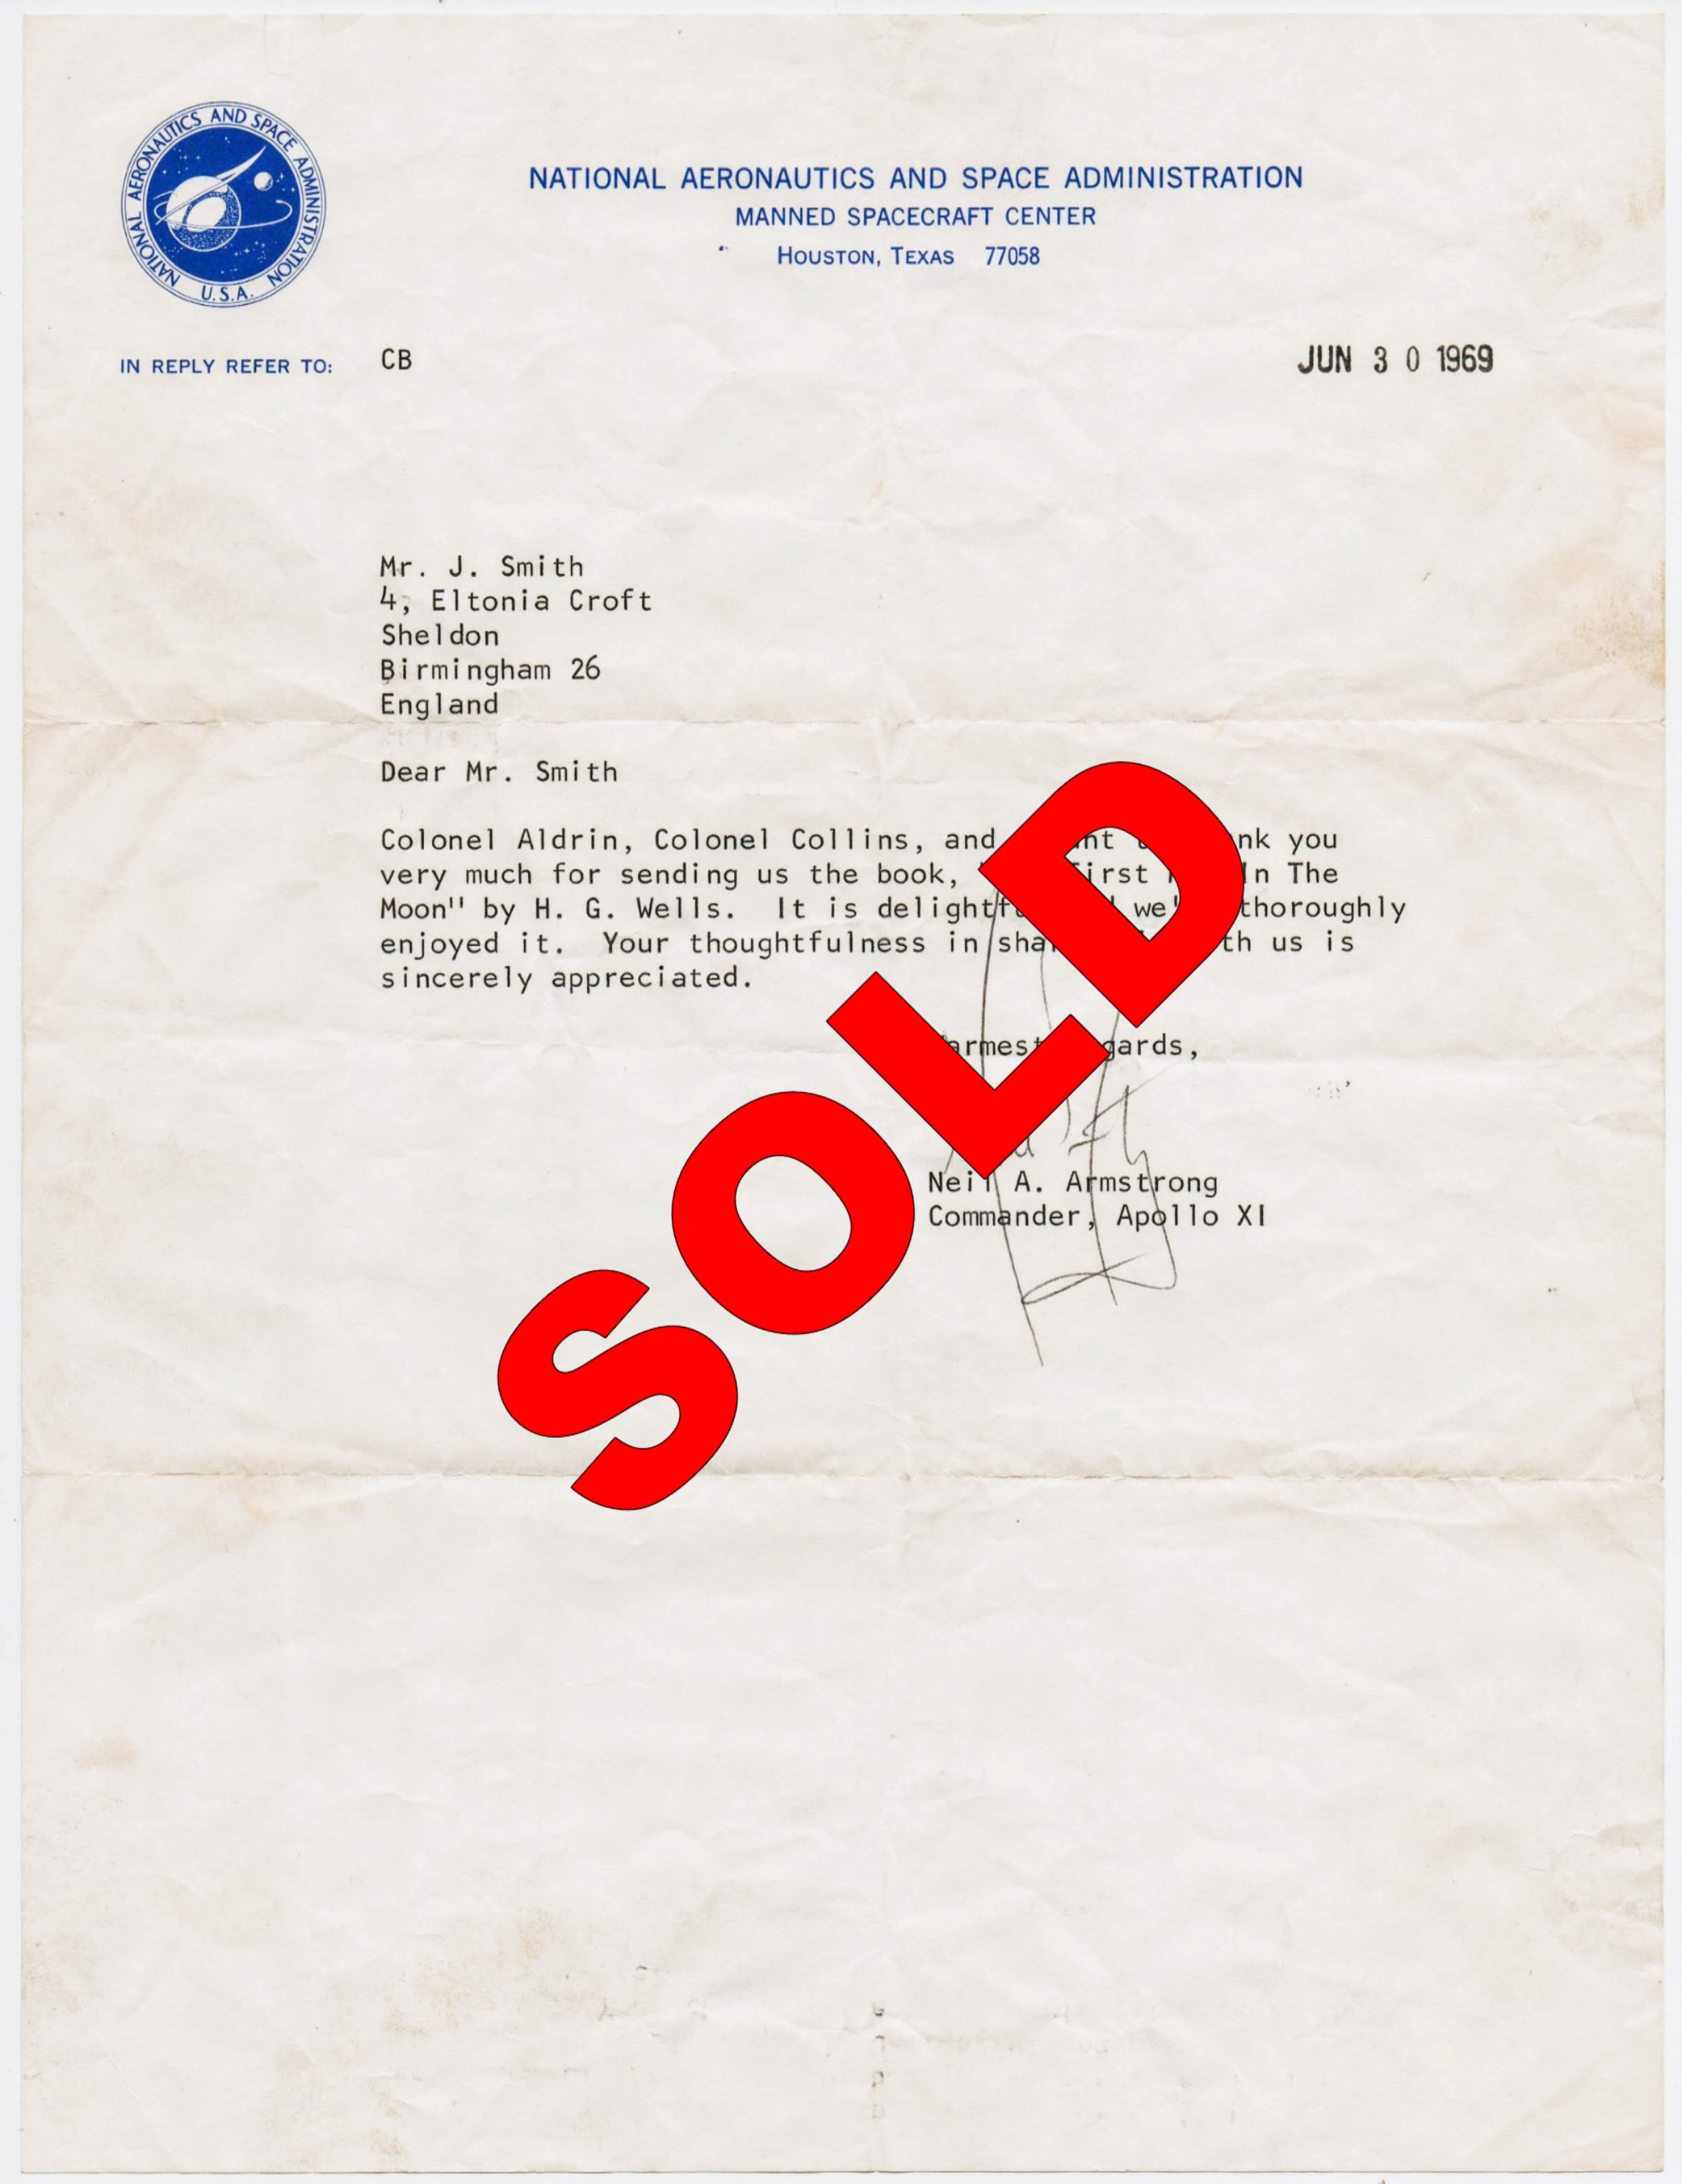 1969 Neil Armstrong signed letter 3 weeks prior to Apollo 11 launch